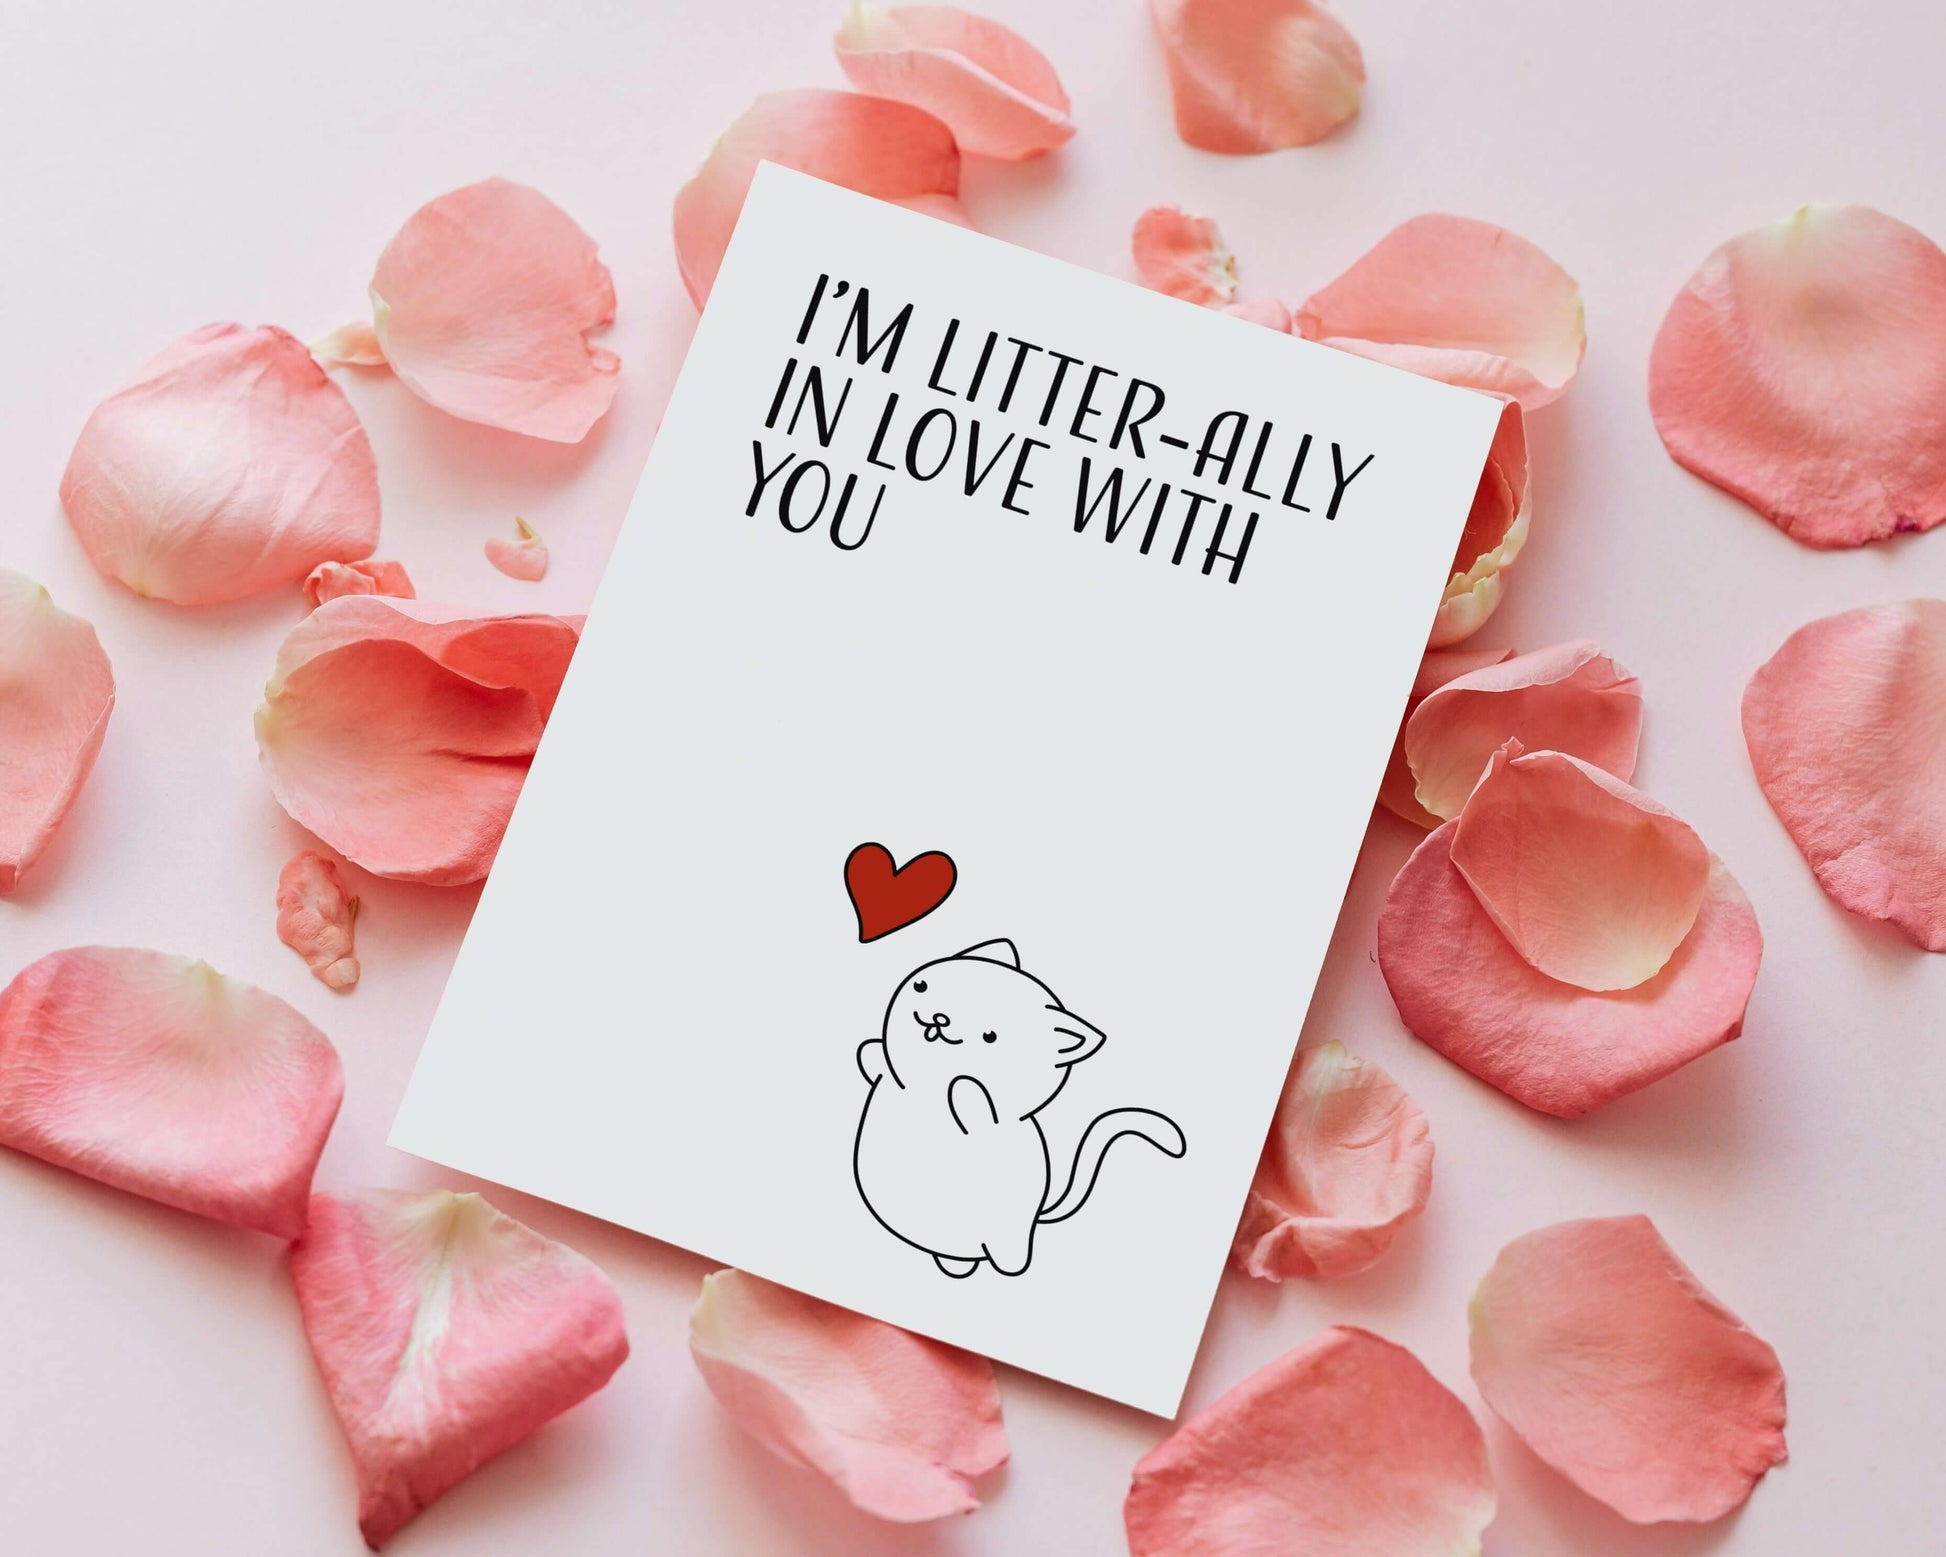 The Card Store UK's I'm Litterally In Love With You | Funny Love General Blank Everyday Card | Cat Pun Greeting Card, Love Cards for £3.50 each